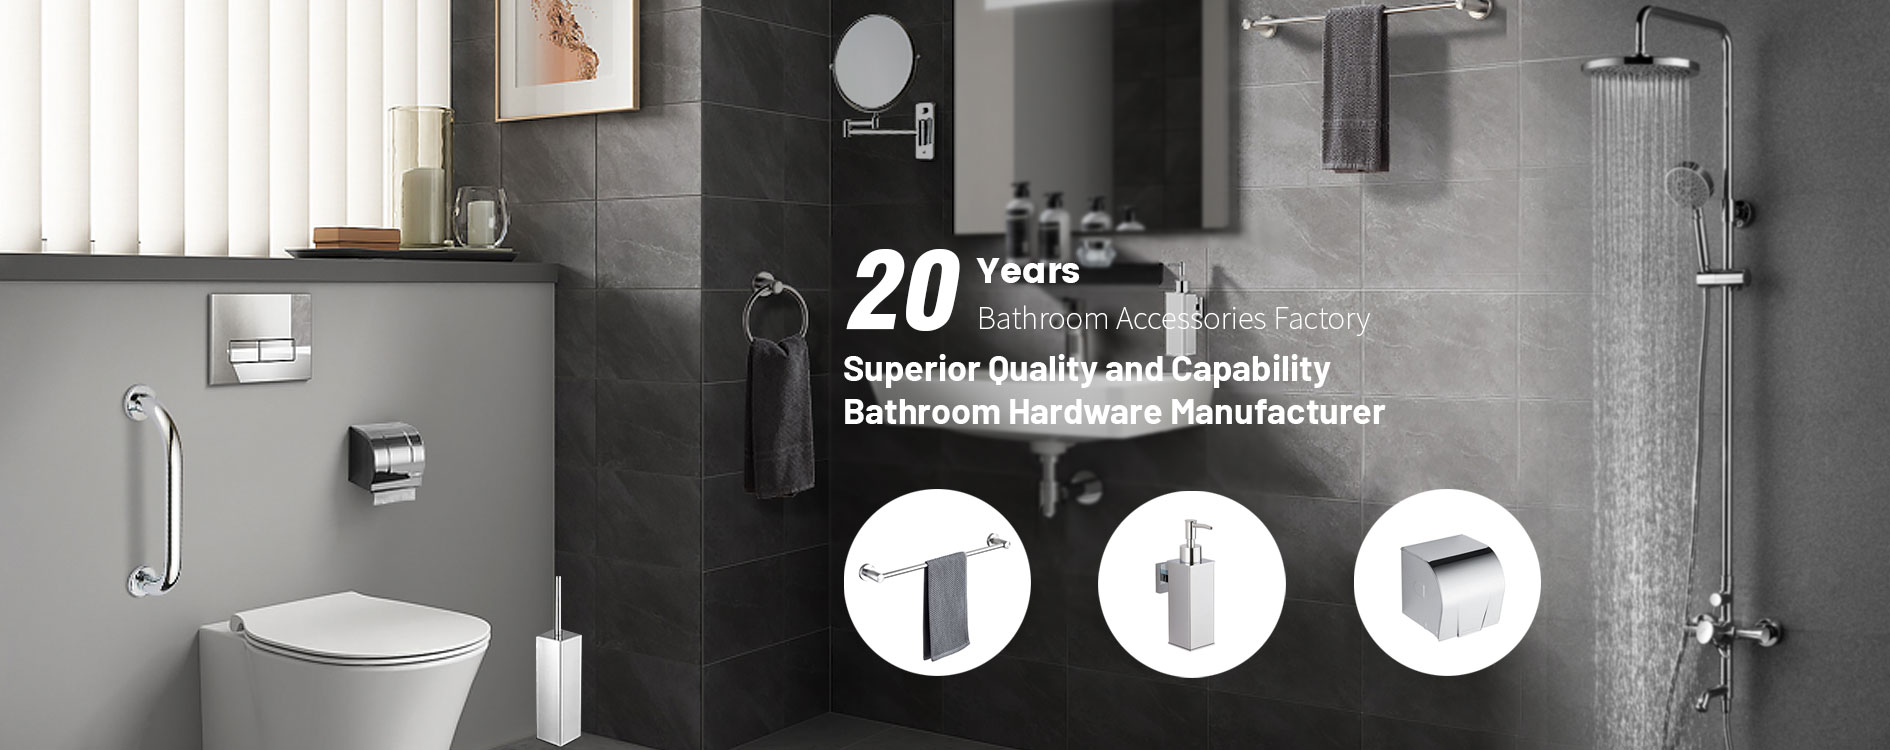 Superior Quality and Capability Bathroom Hardware Manufacturer